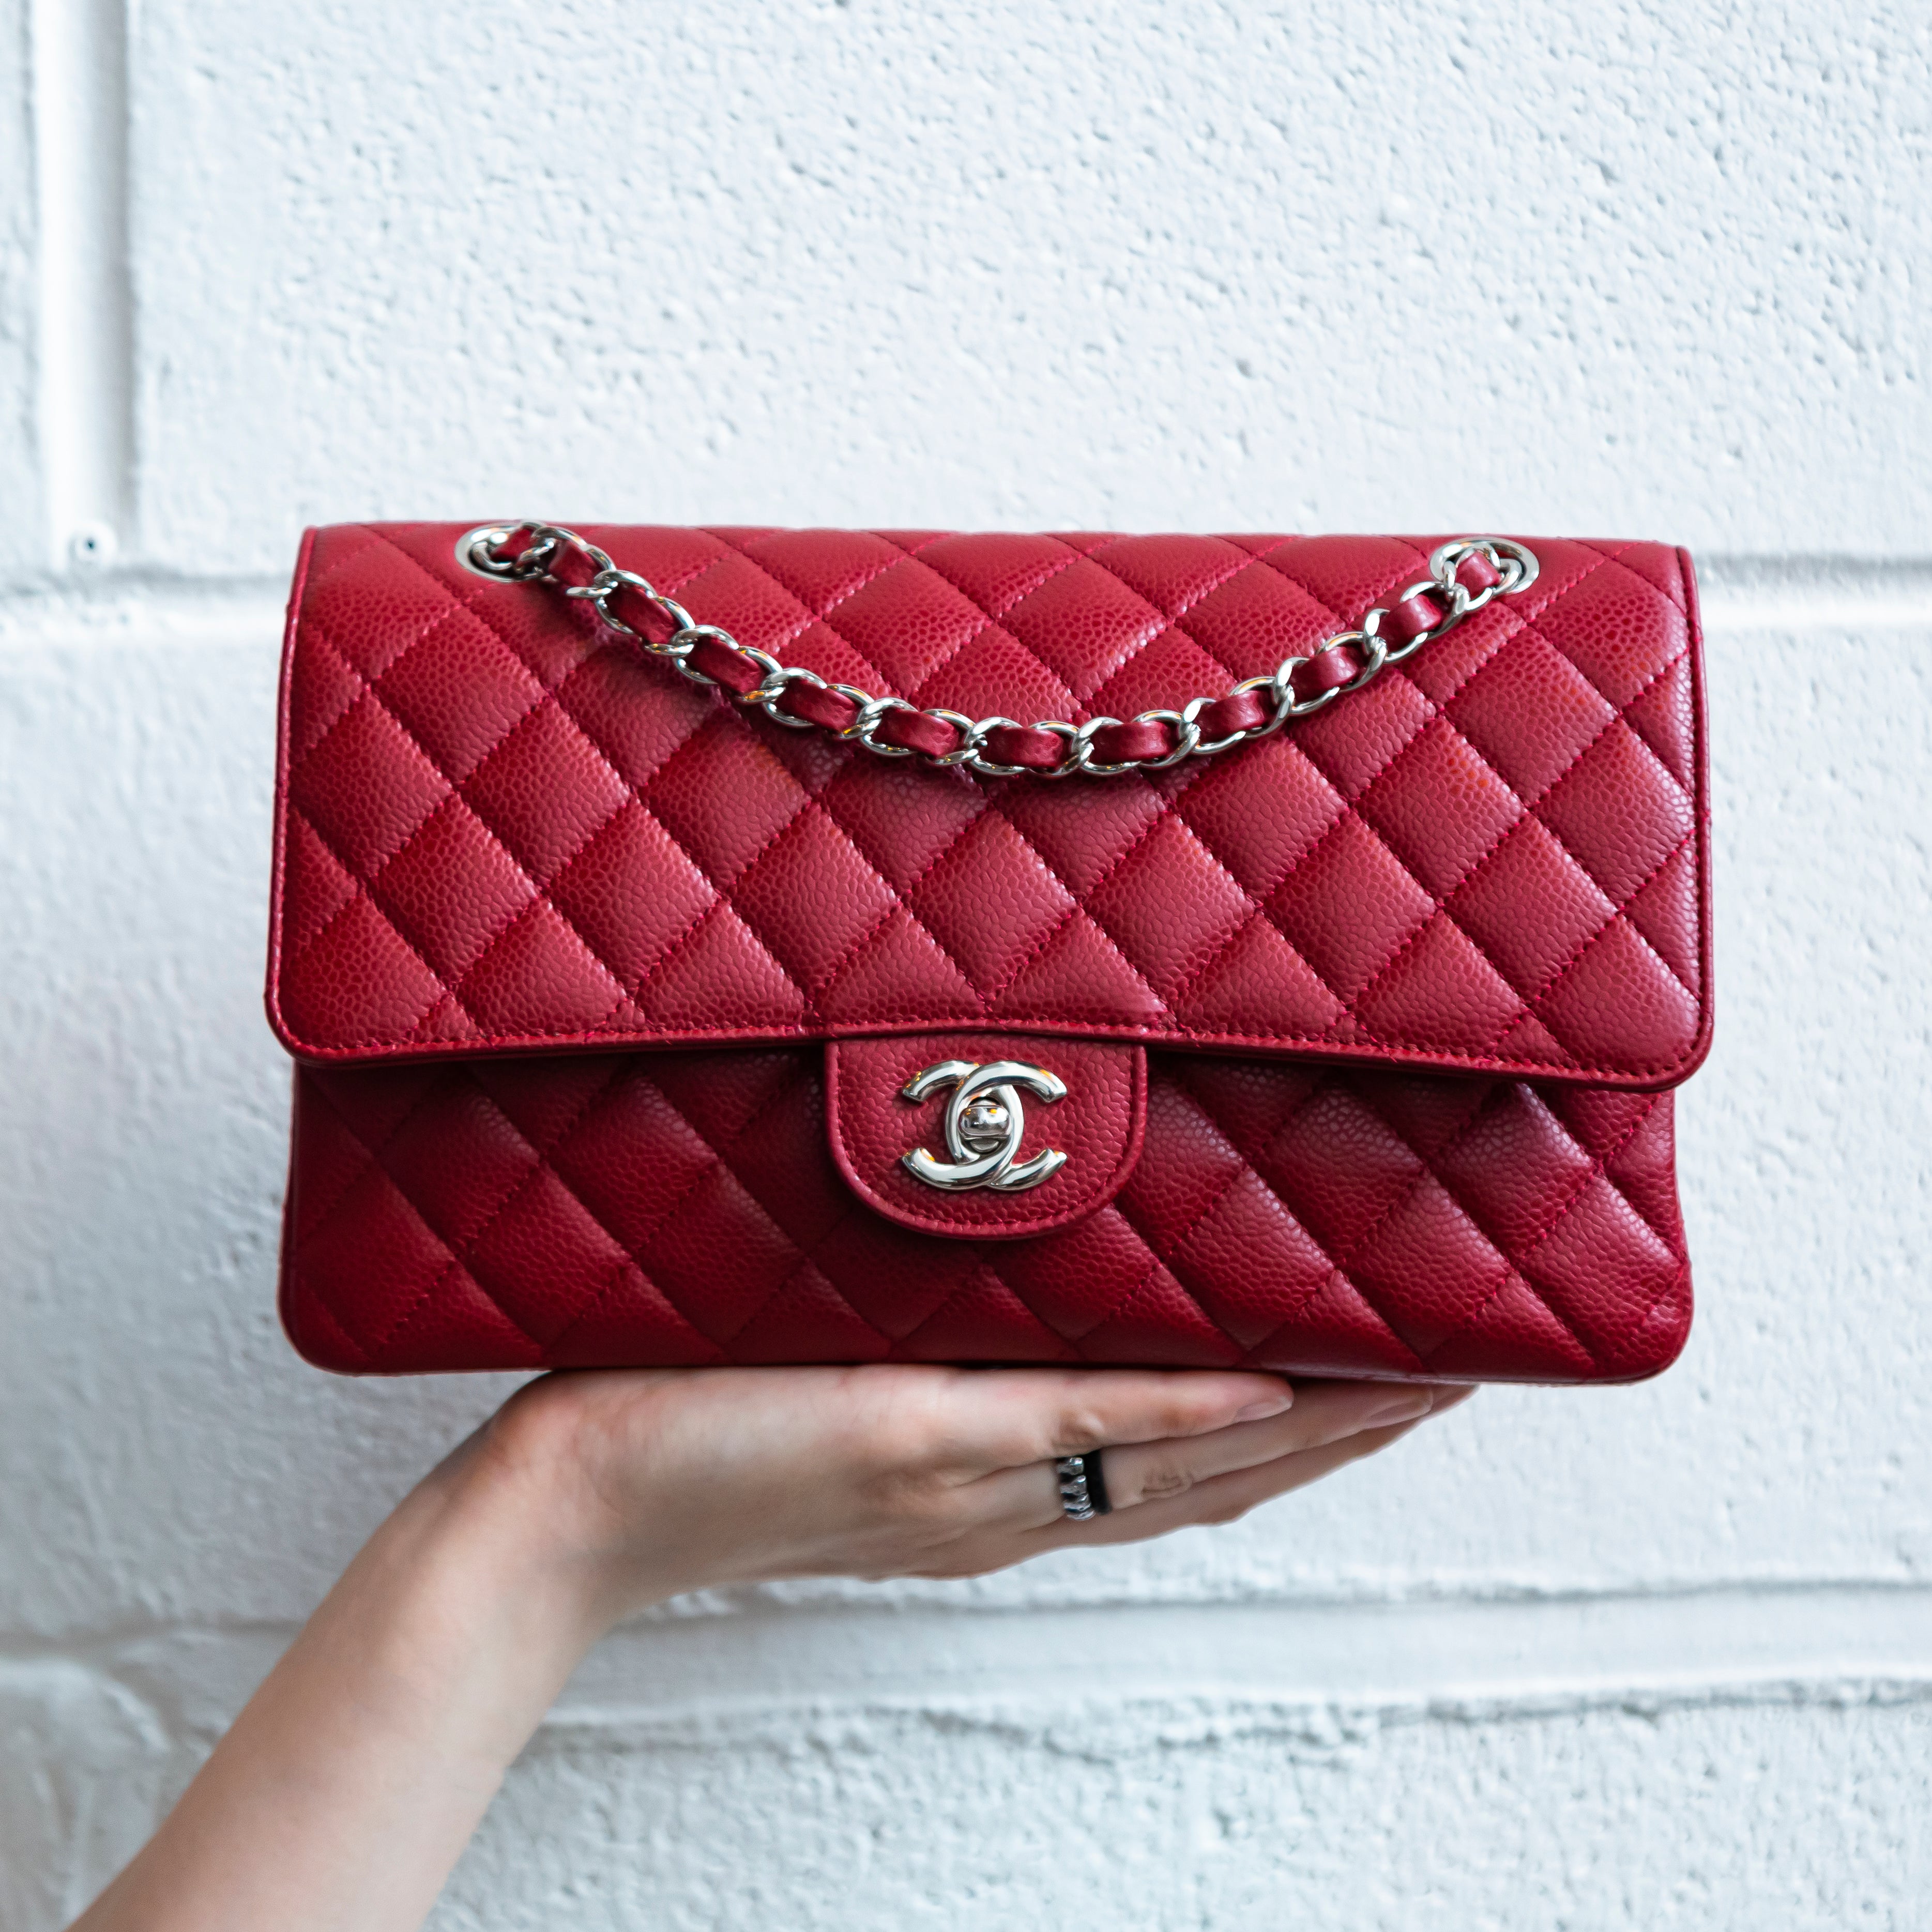 everything CHANEL  Fashion, Chanel bag outfit, Chanel bag sale